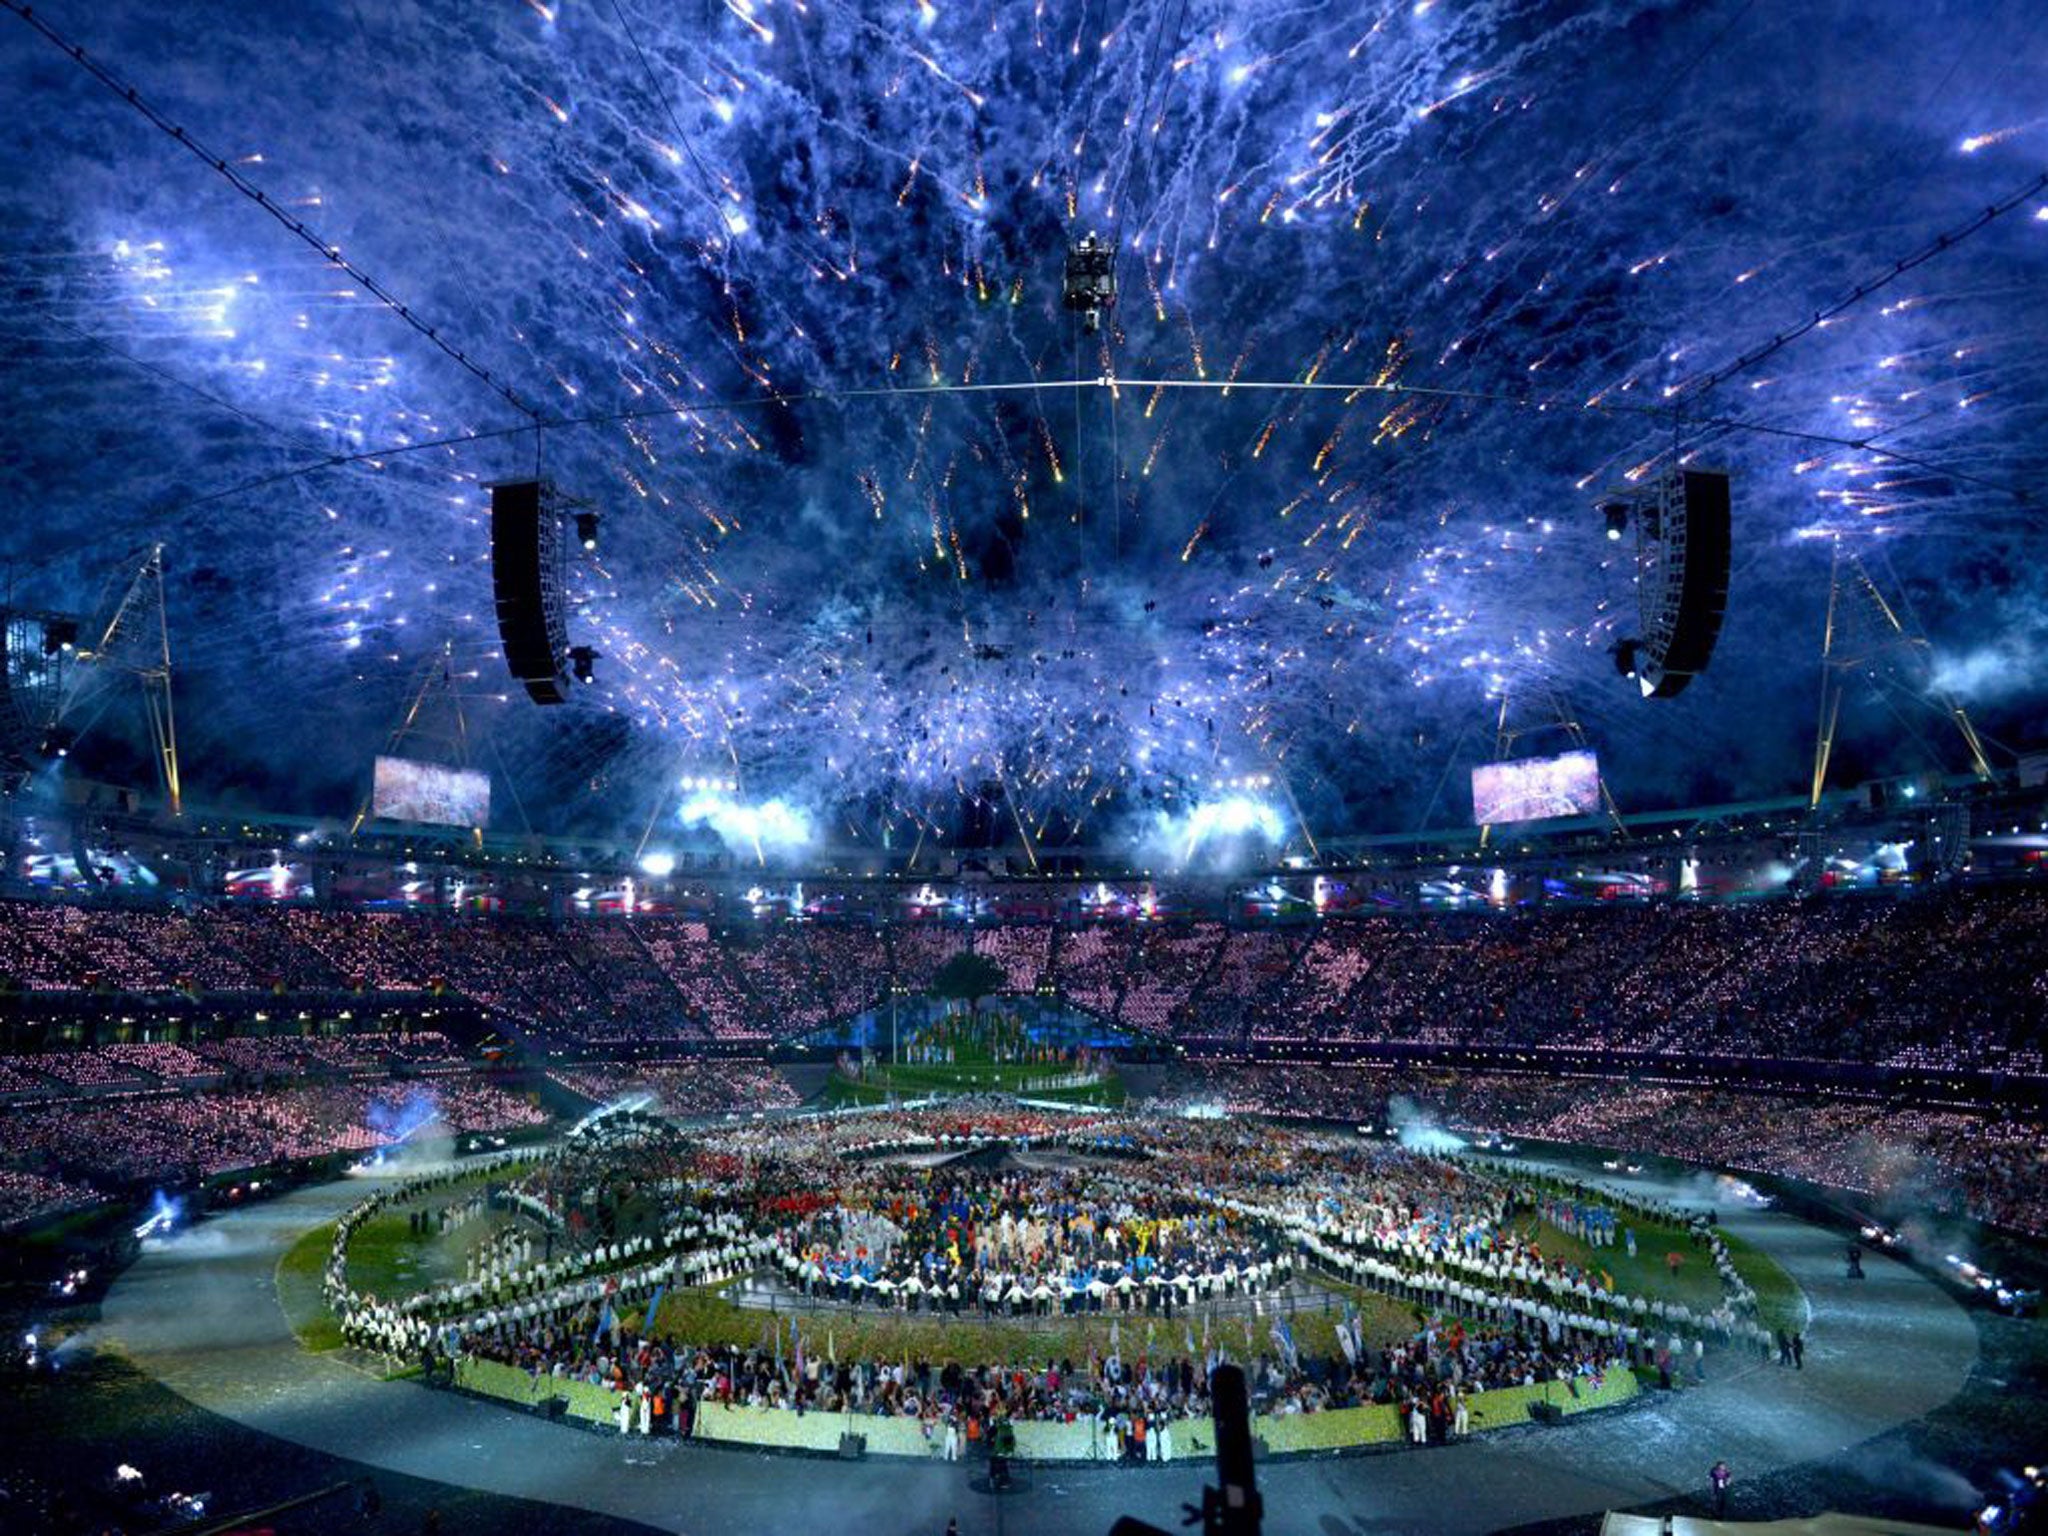 Not even the opening of the 2012 Olympics could persuade many viewers to watch the BBC’s 3D broadcast